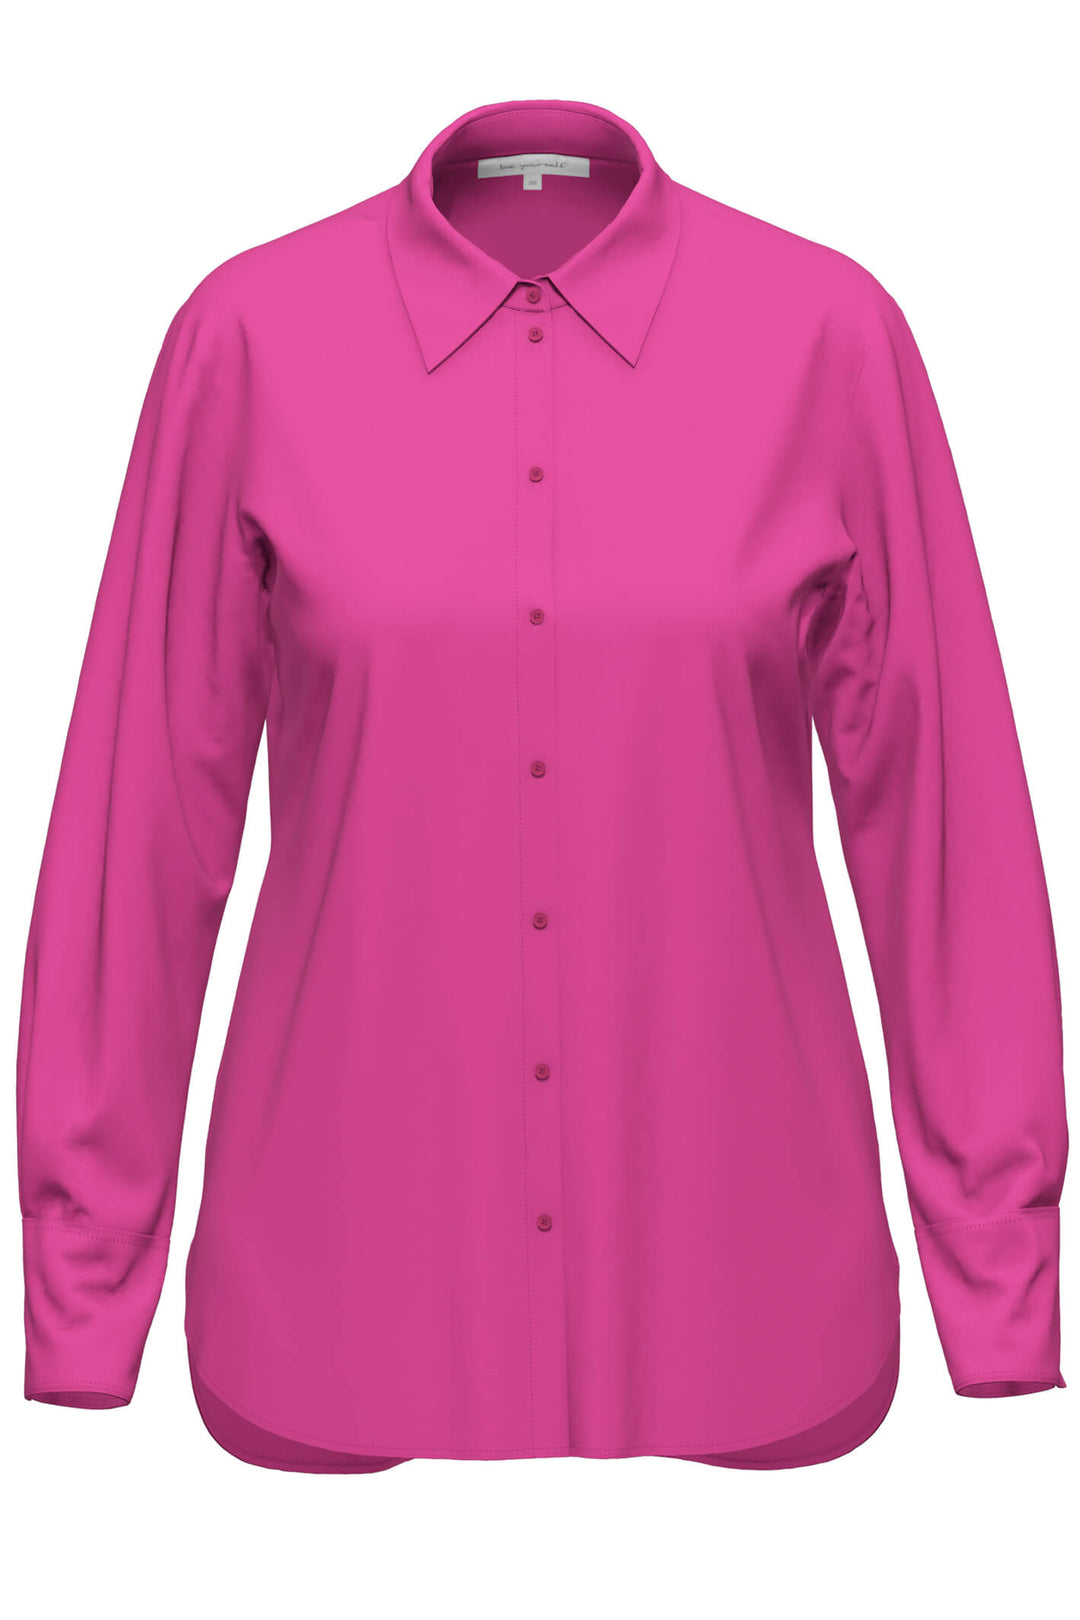 Erfo 751103000 Neon Pink Blouse - Experience Boutique